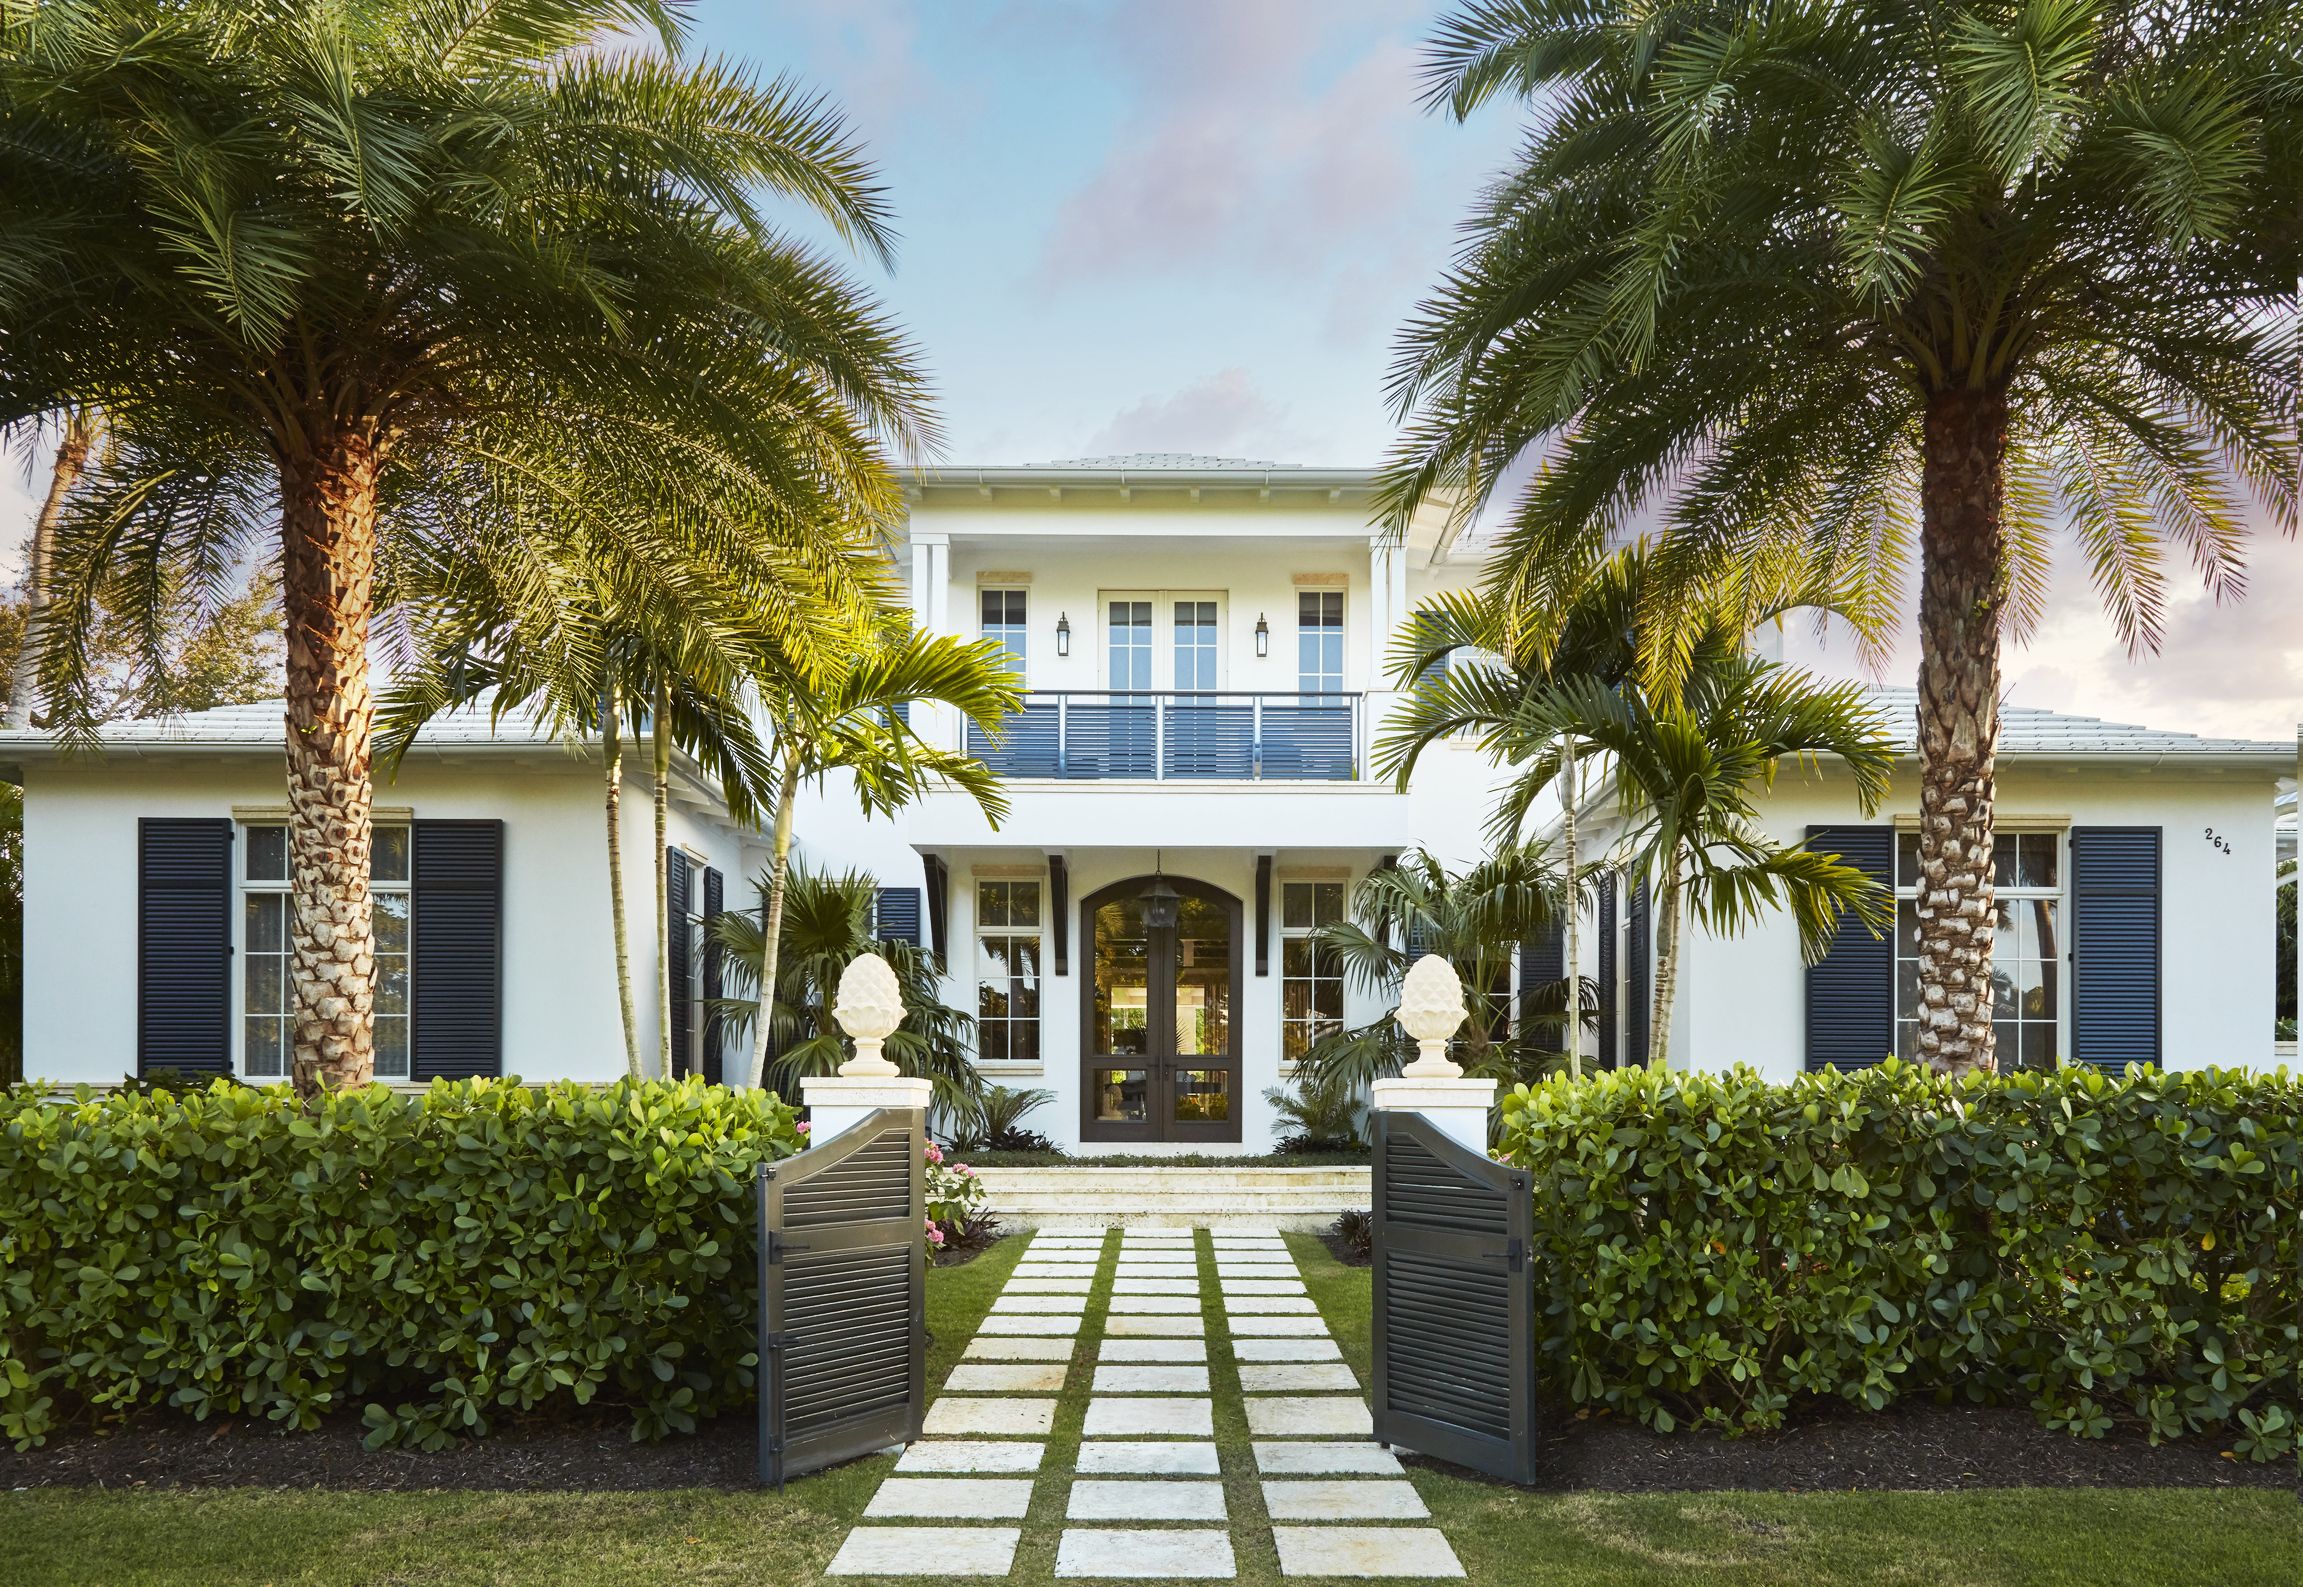 a grid of coral stone pavers creates a tidy path into 
a u shaped entry court yard and allée of palms